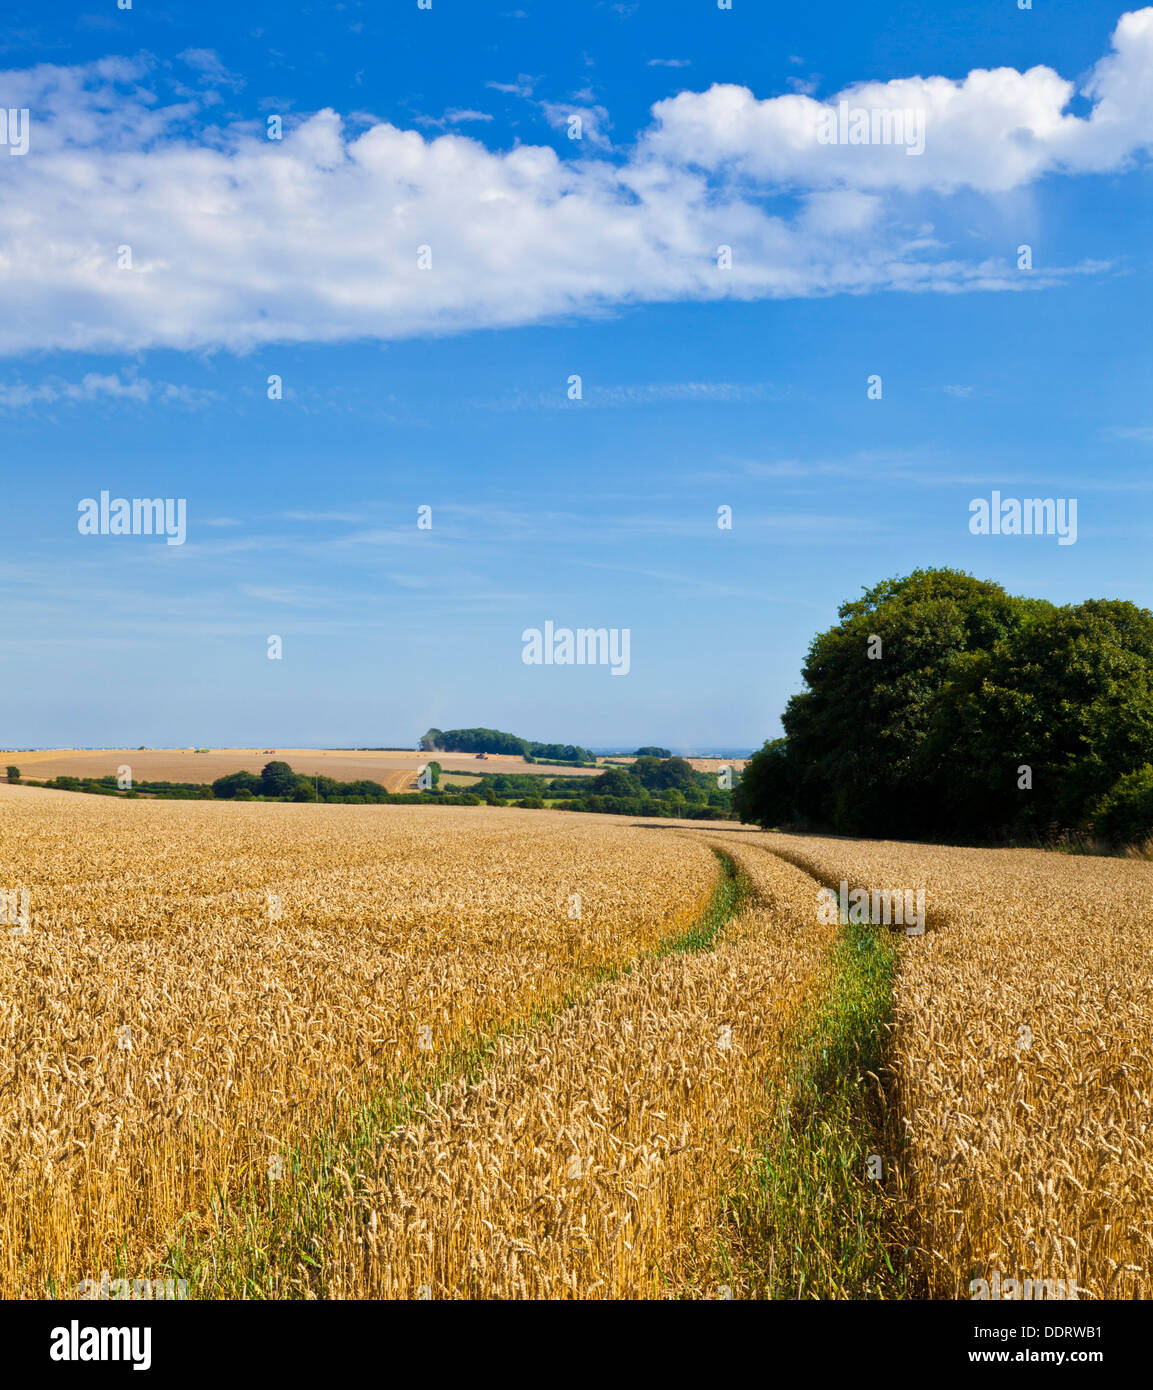 Crops in fields ready for harvesting near Louth Lincolnshire wolds England UK GB EU Europe Stock Photo